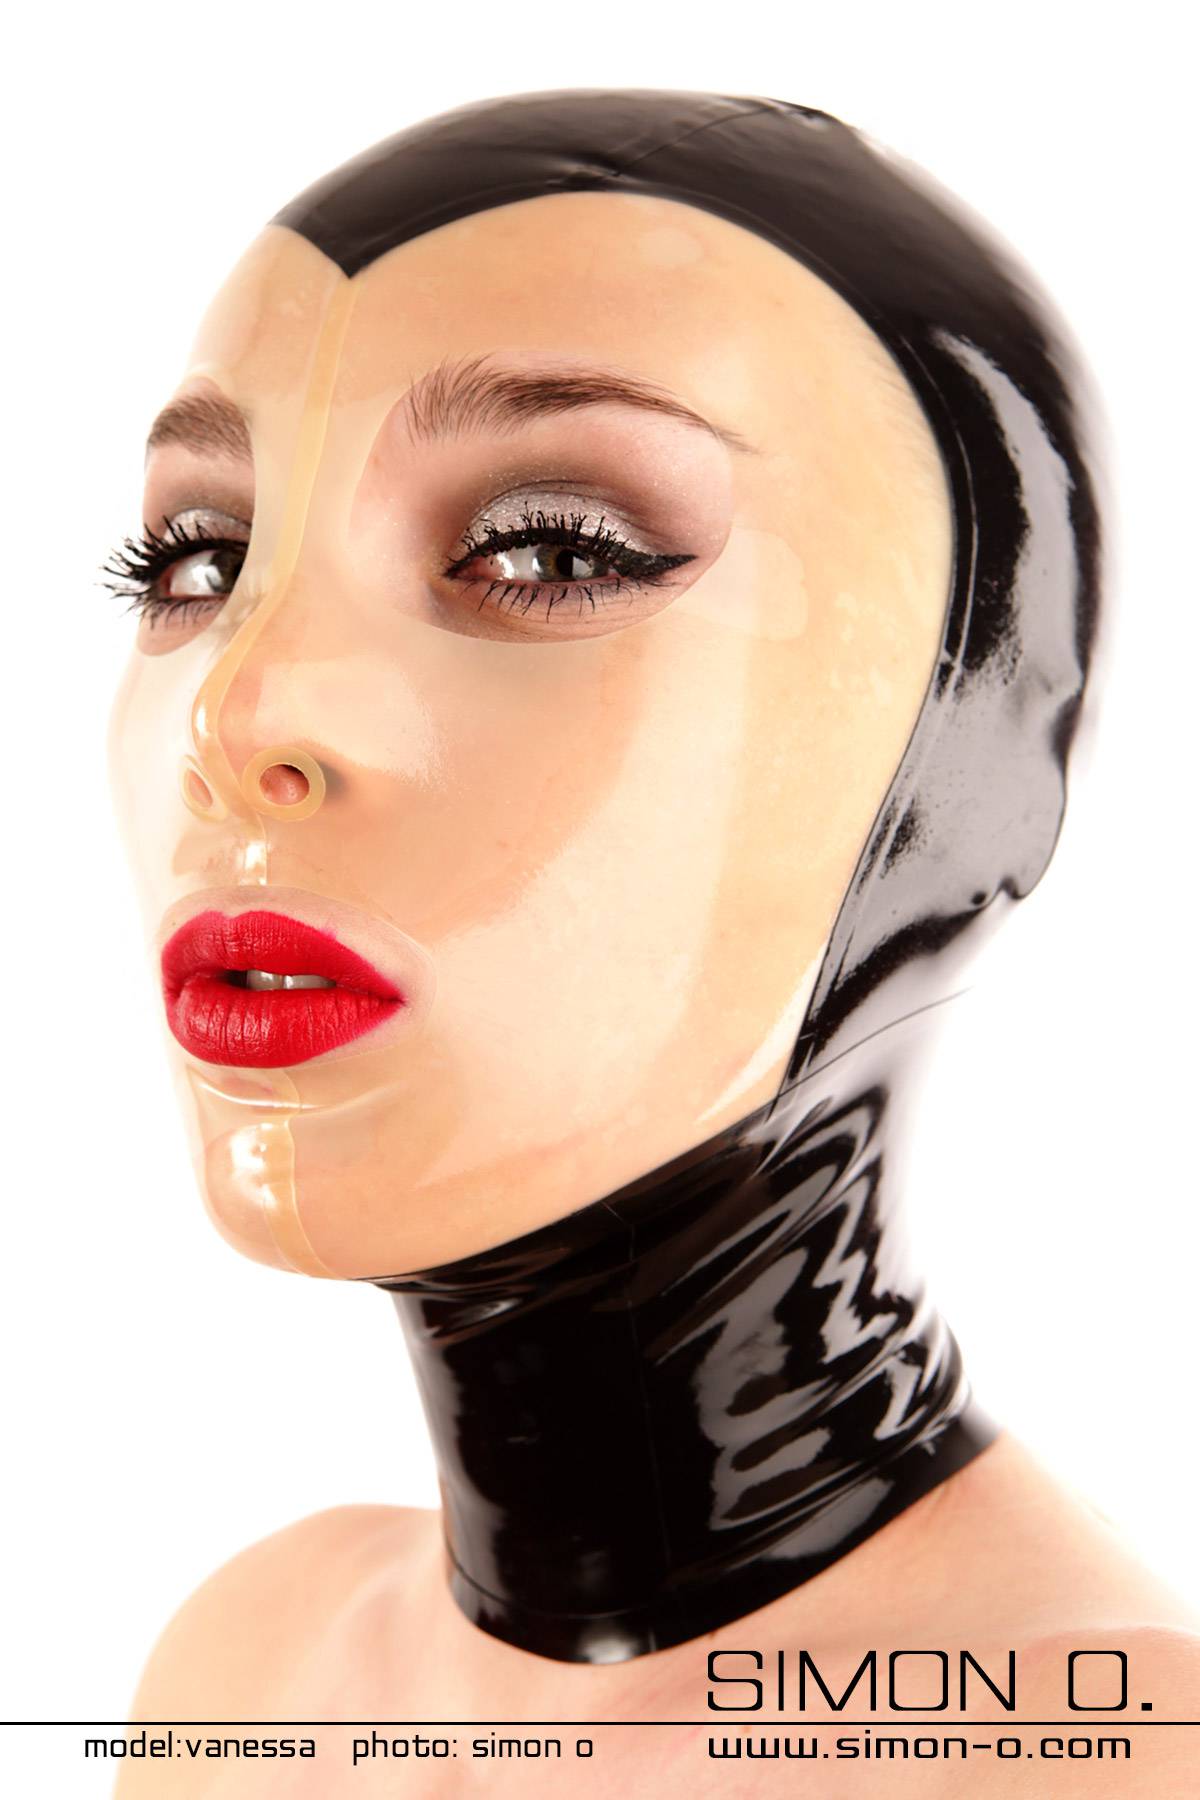 A woman wears a black latex hood with a transparent face panel